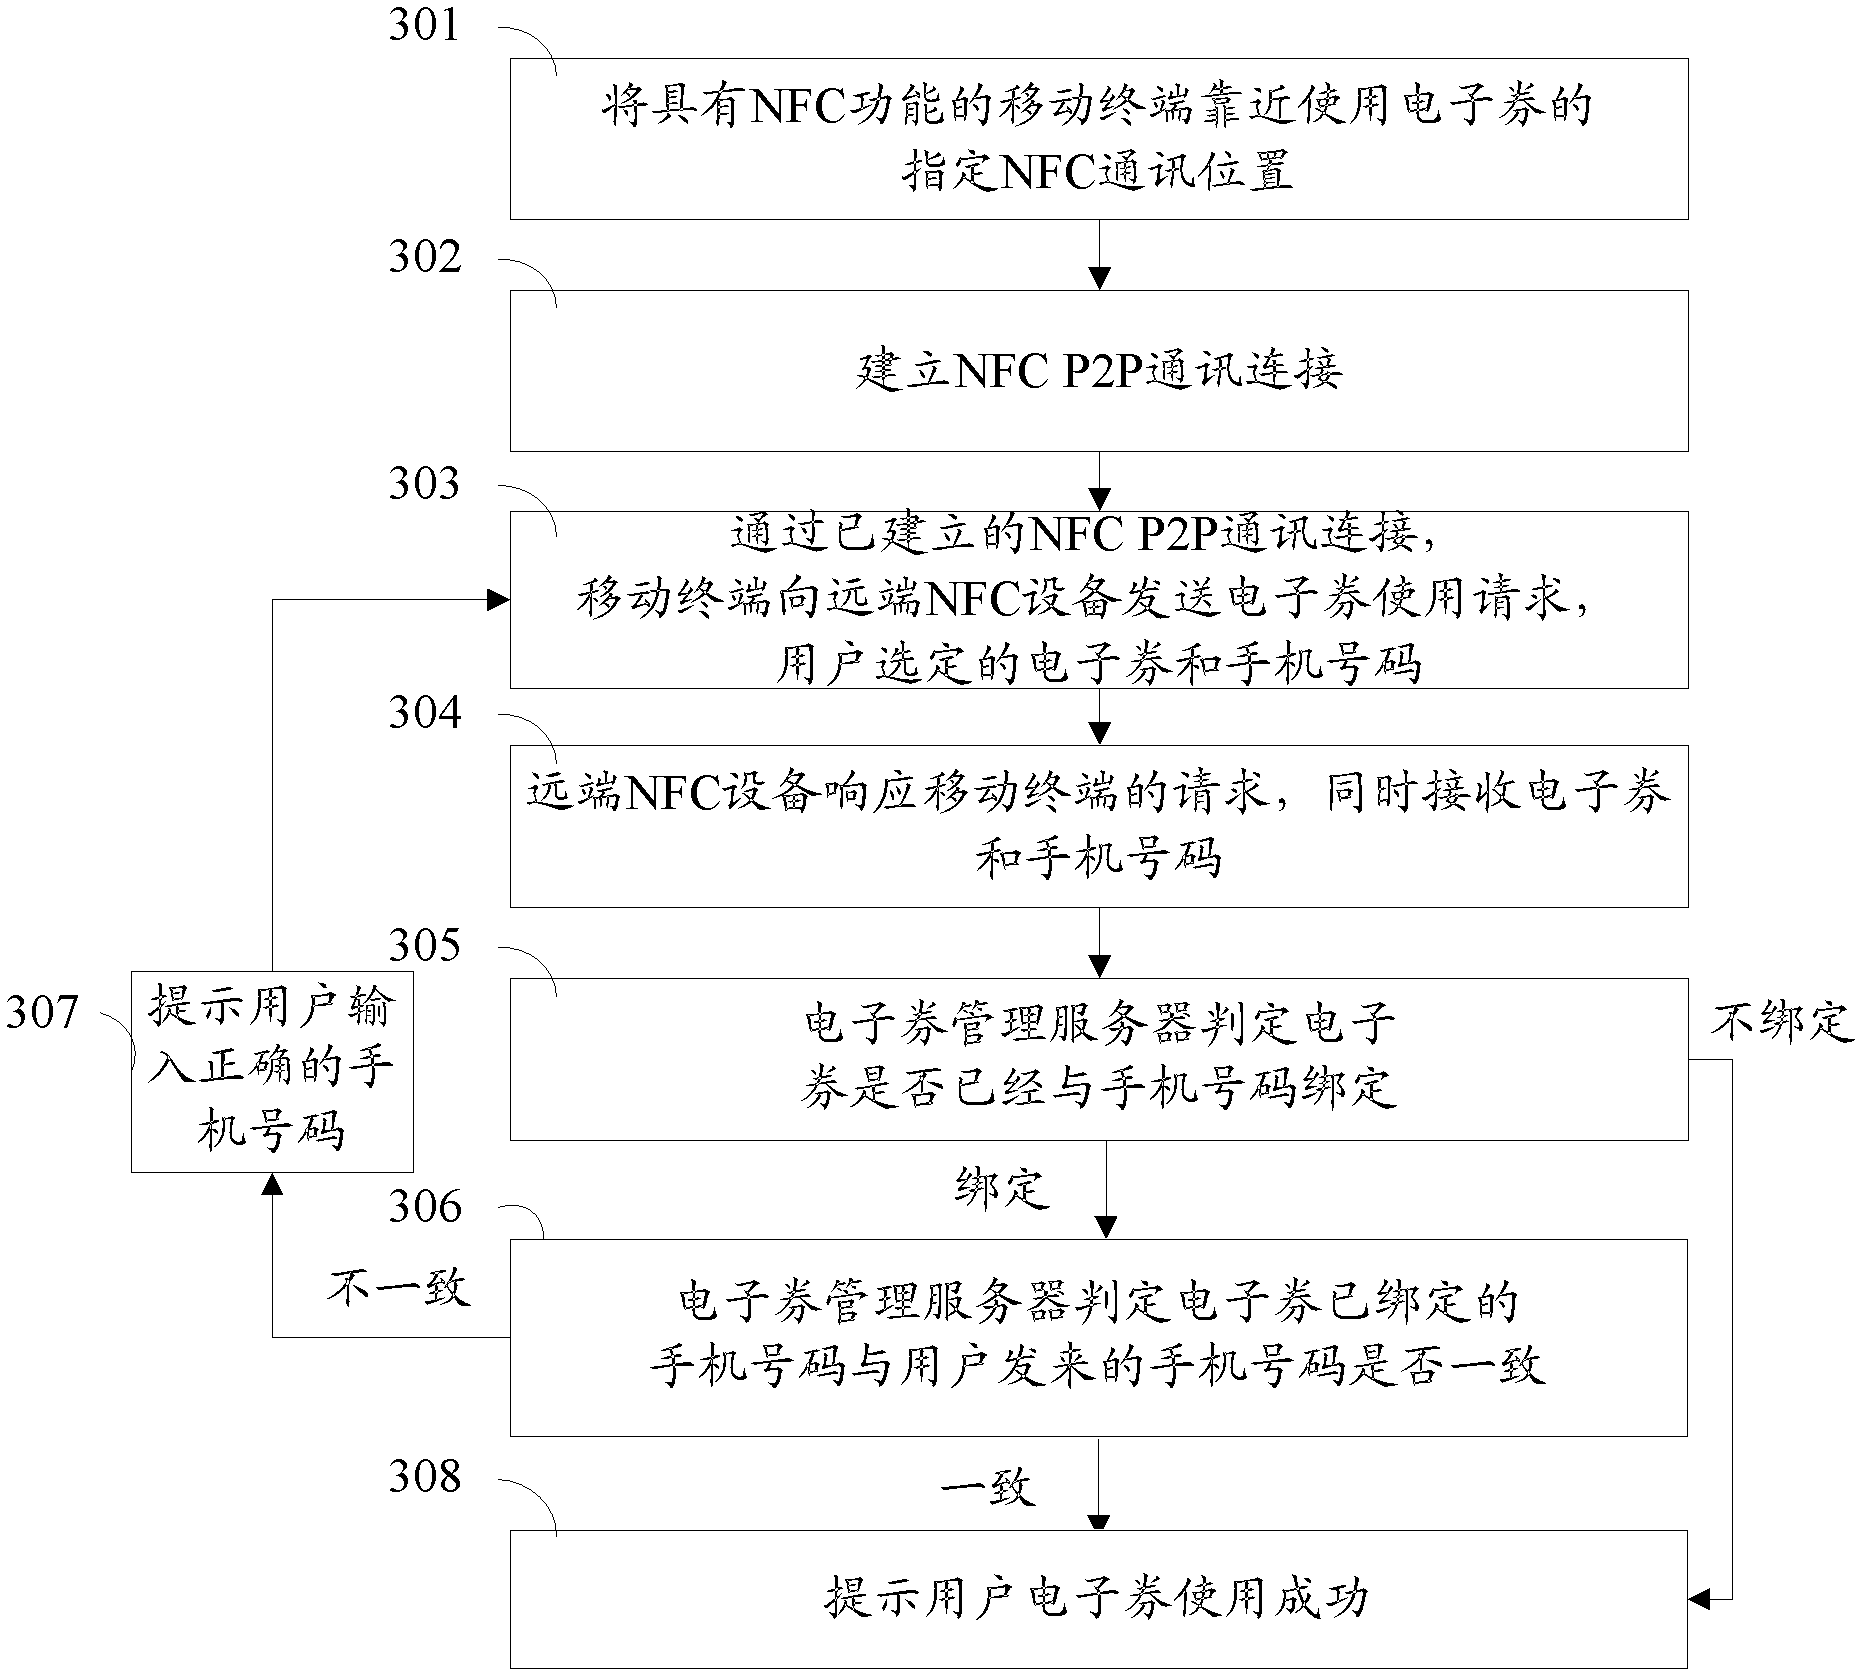 Method and system of obtaining and use of electronic voucher